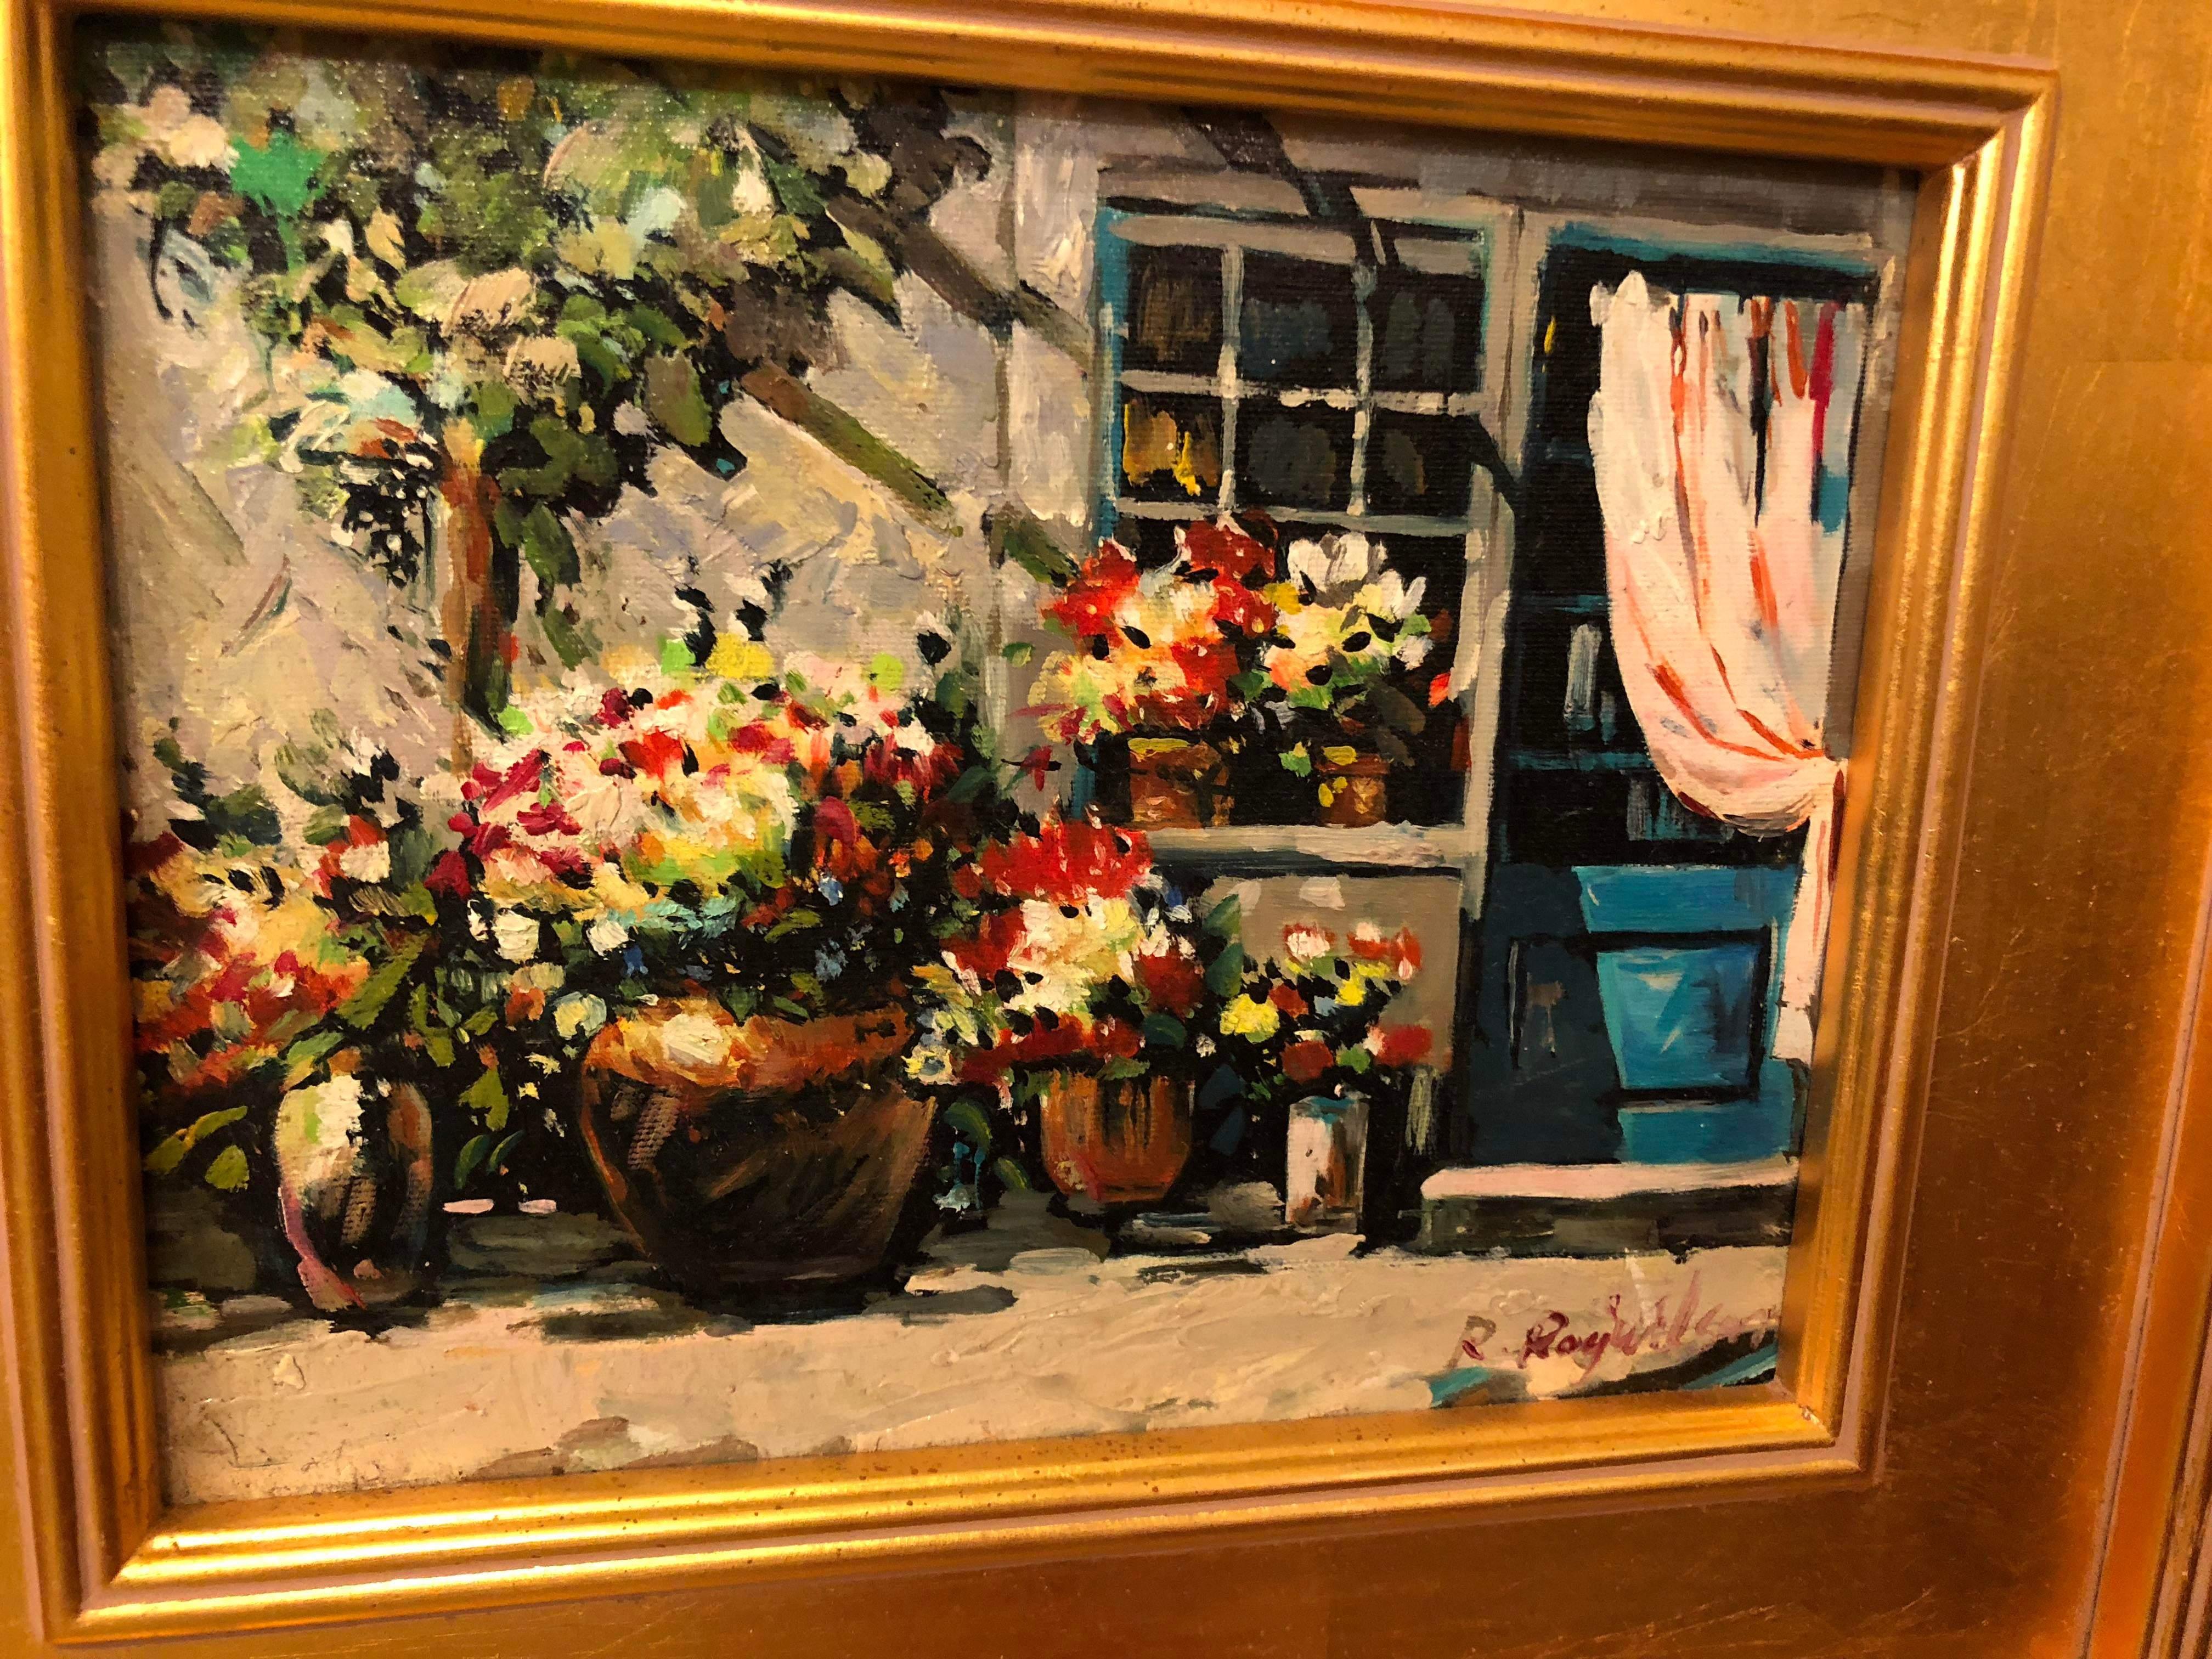 A 1980s impressionistic oil on canvas painting. This beautiful painting comes in a custom gilt frame and features vivid colors and a beautiful scene of an outdoor home garden/ patio and plants. The painting is signed by the artist. 

Dimensions: 
-